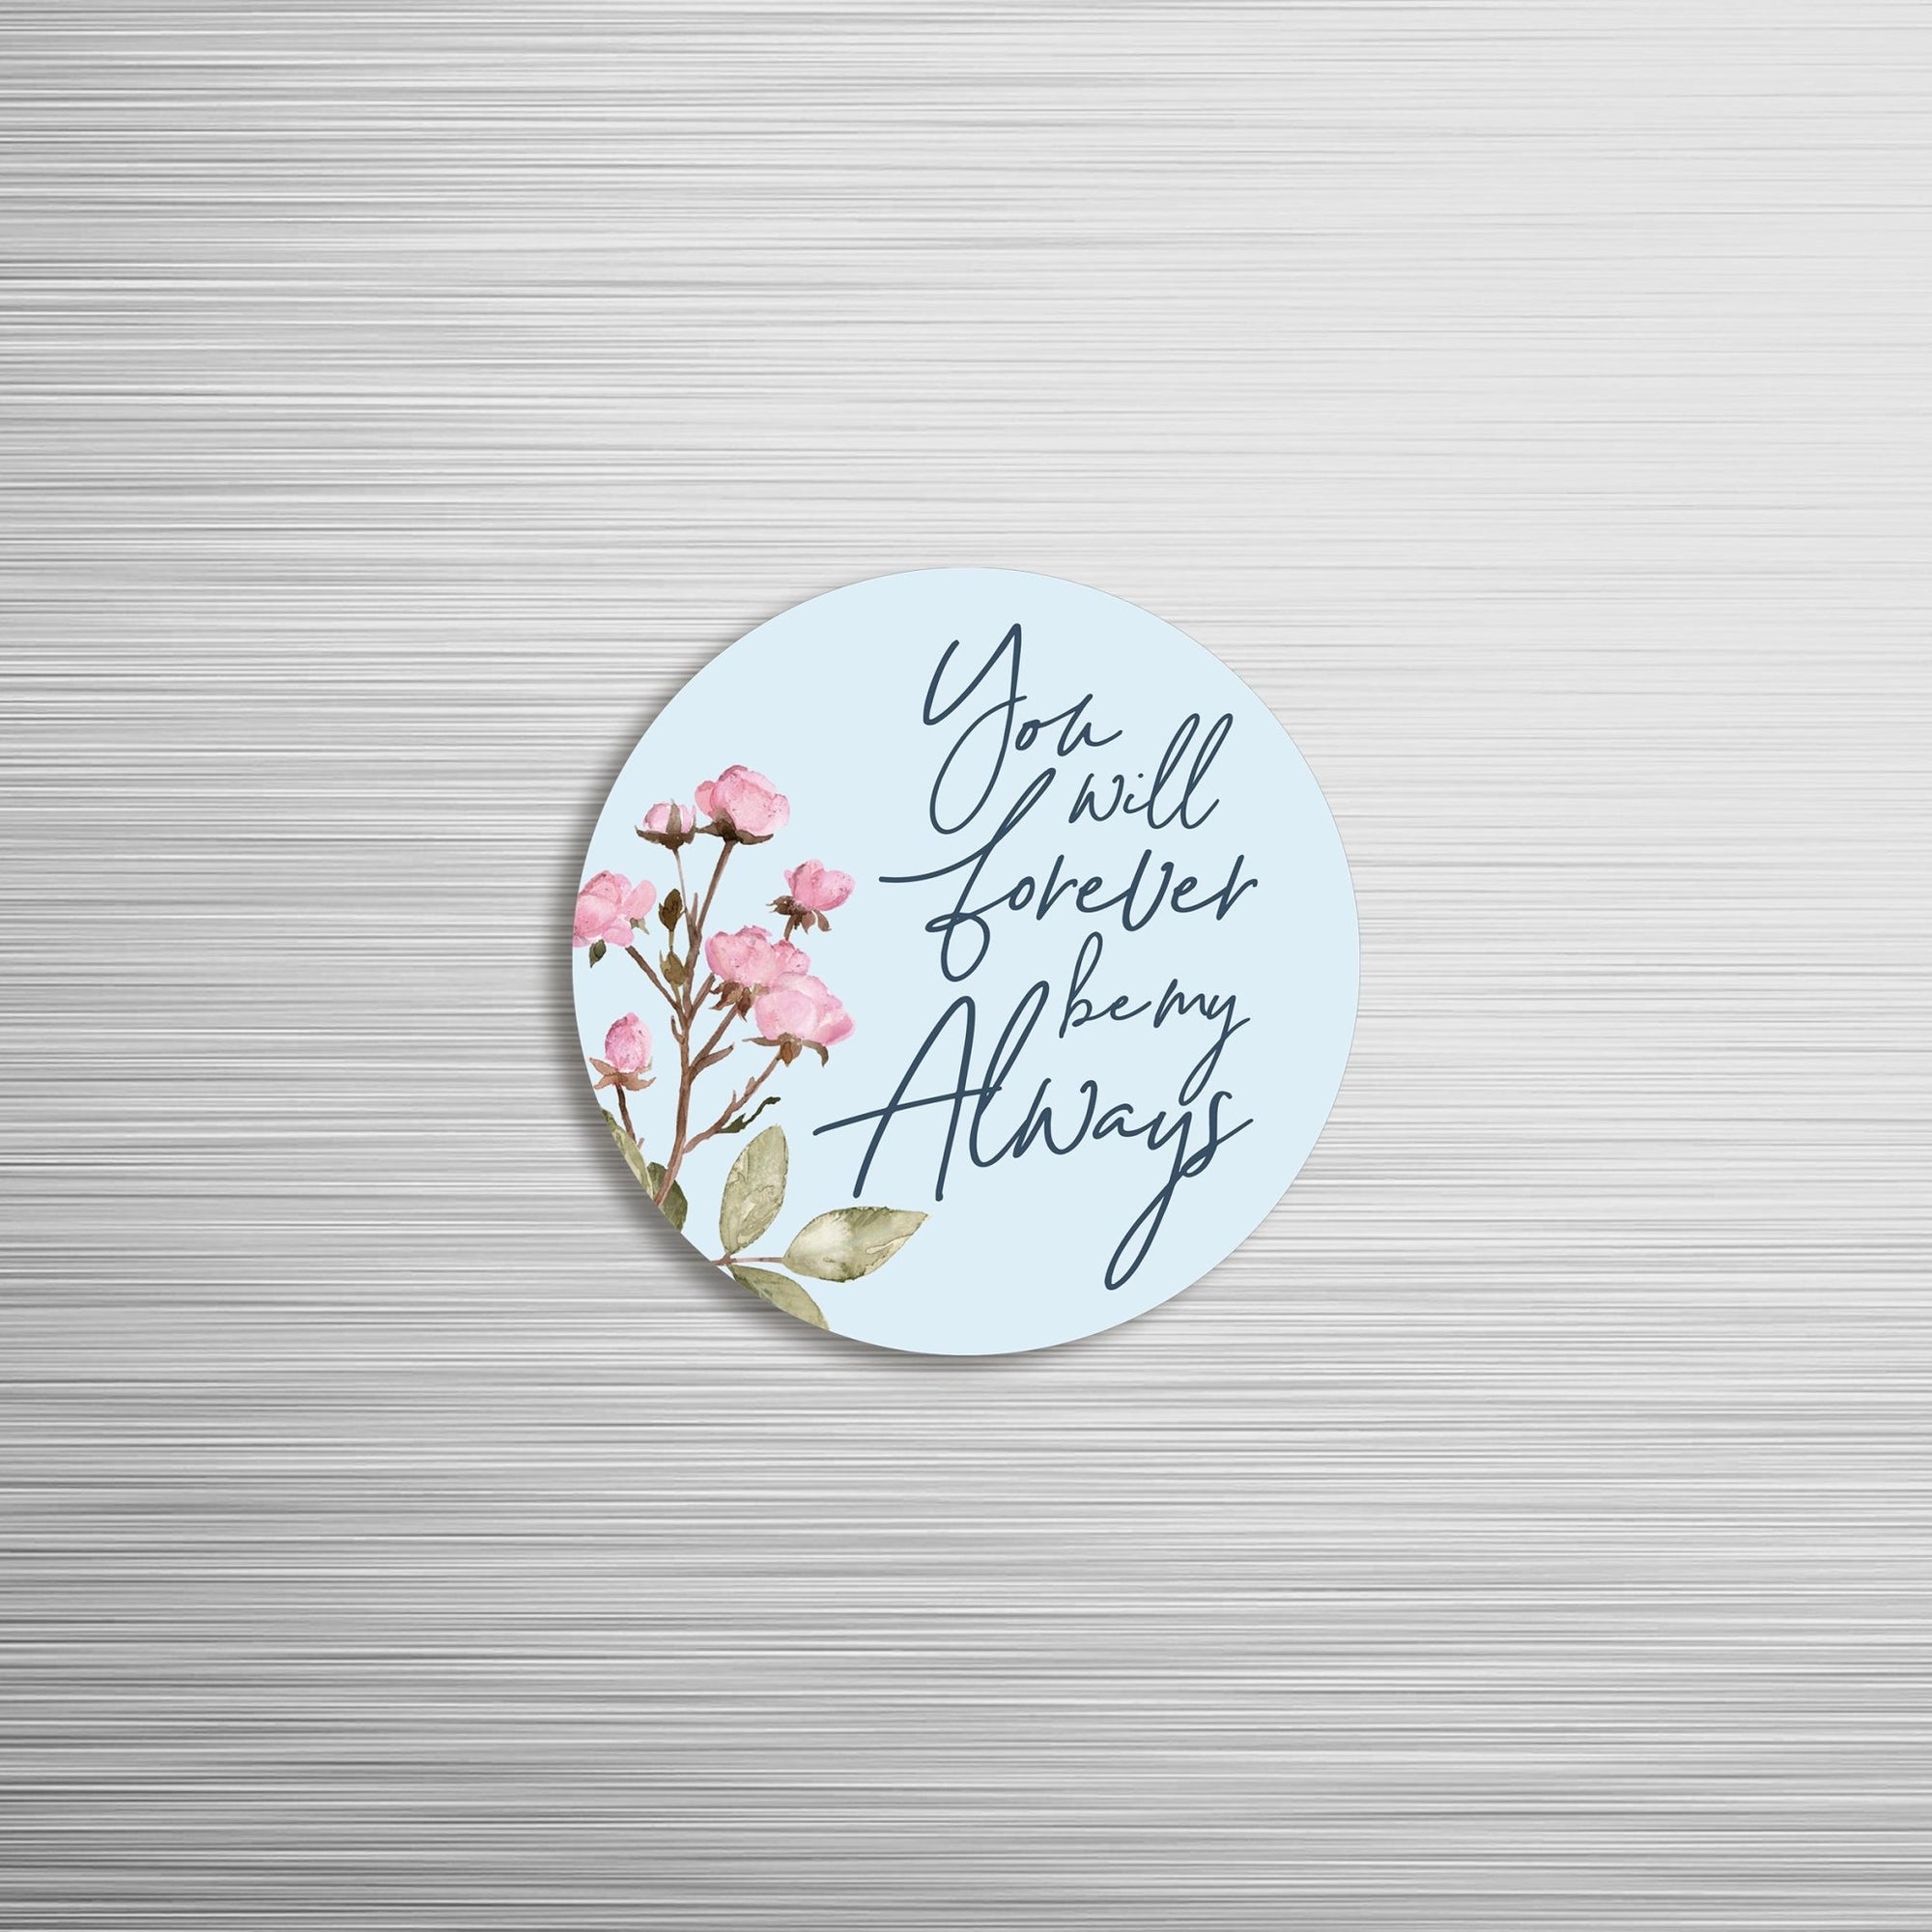 Family & Home Round Refrigerator Magnet Perfect Gift Idea For Home Décor - You Will Forever - LifeSong Milestones